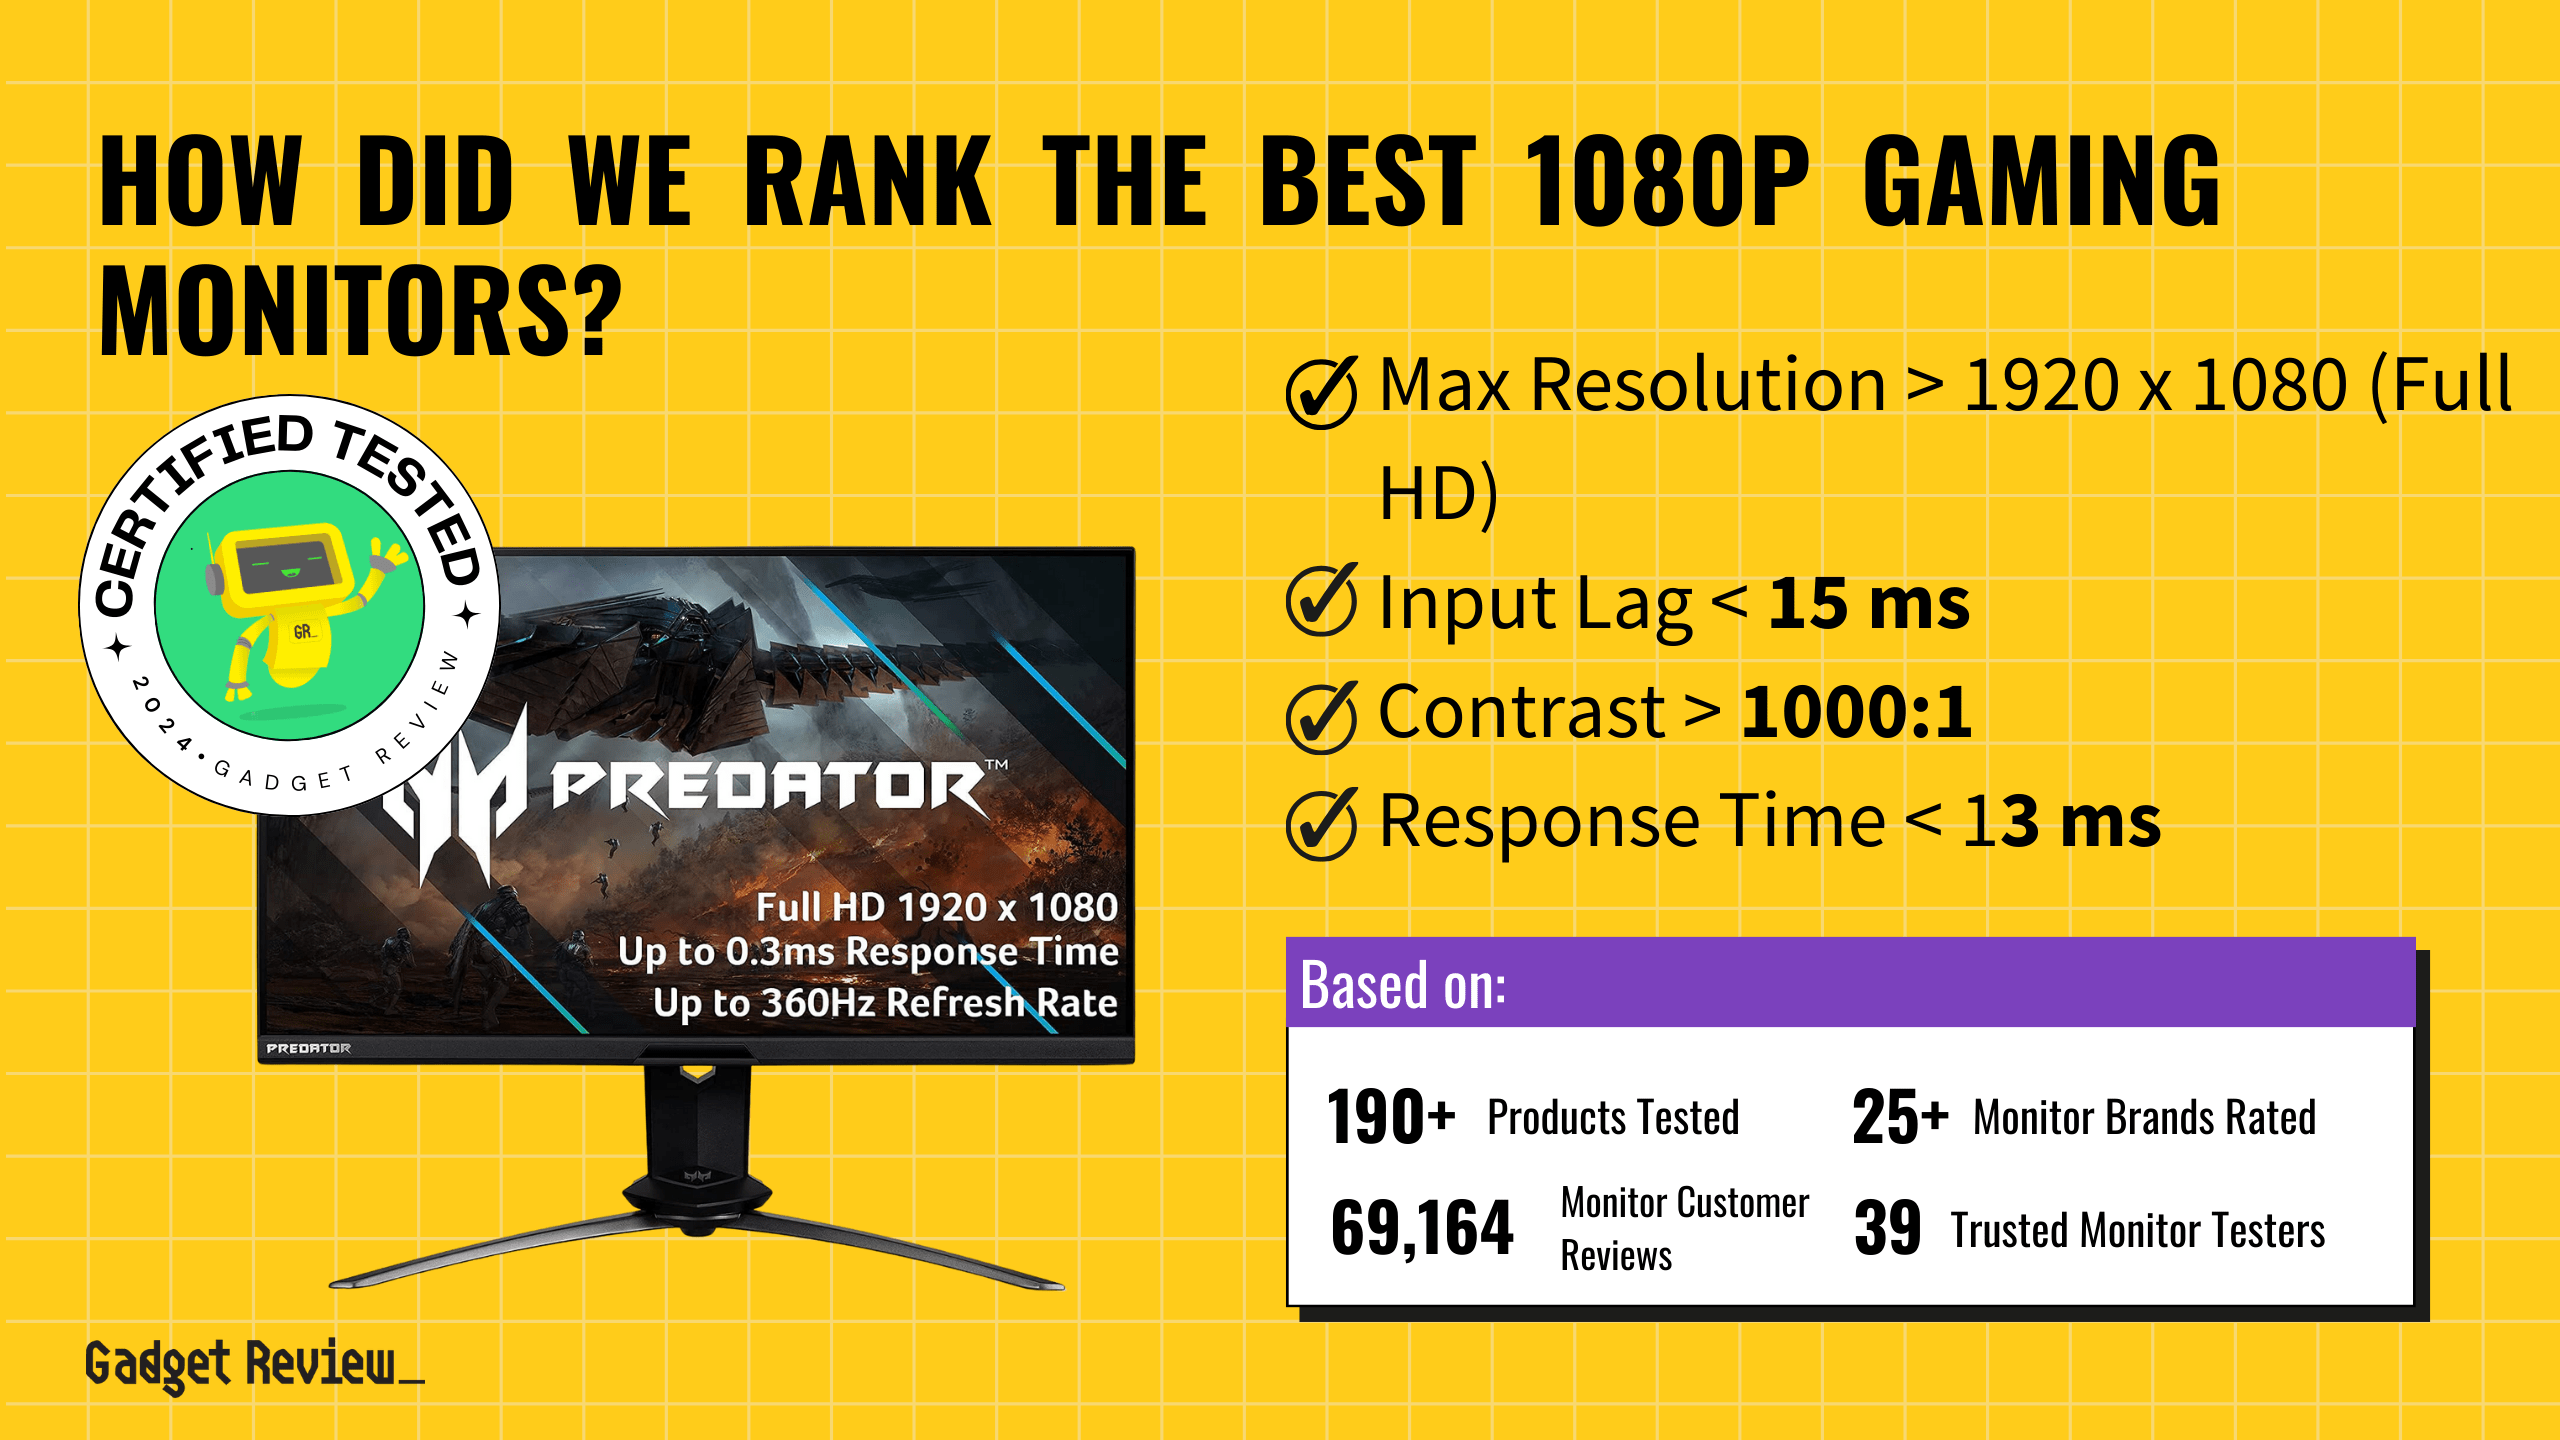 best 1080p gaming monitors guide that shows the top best gaming monitor model